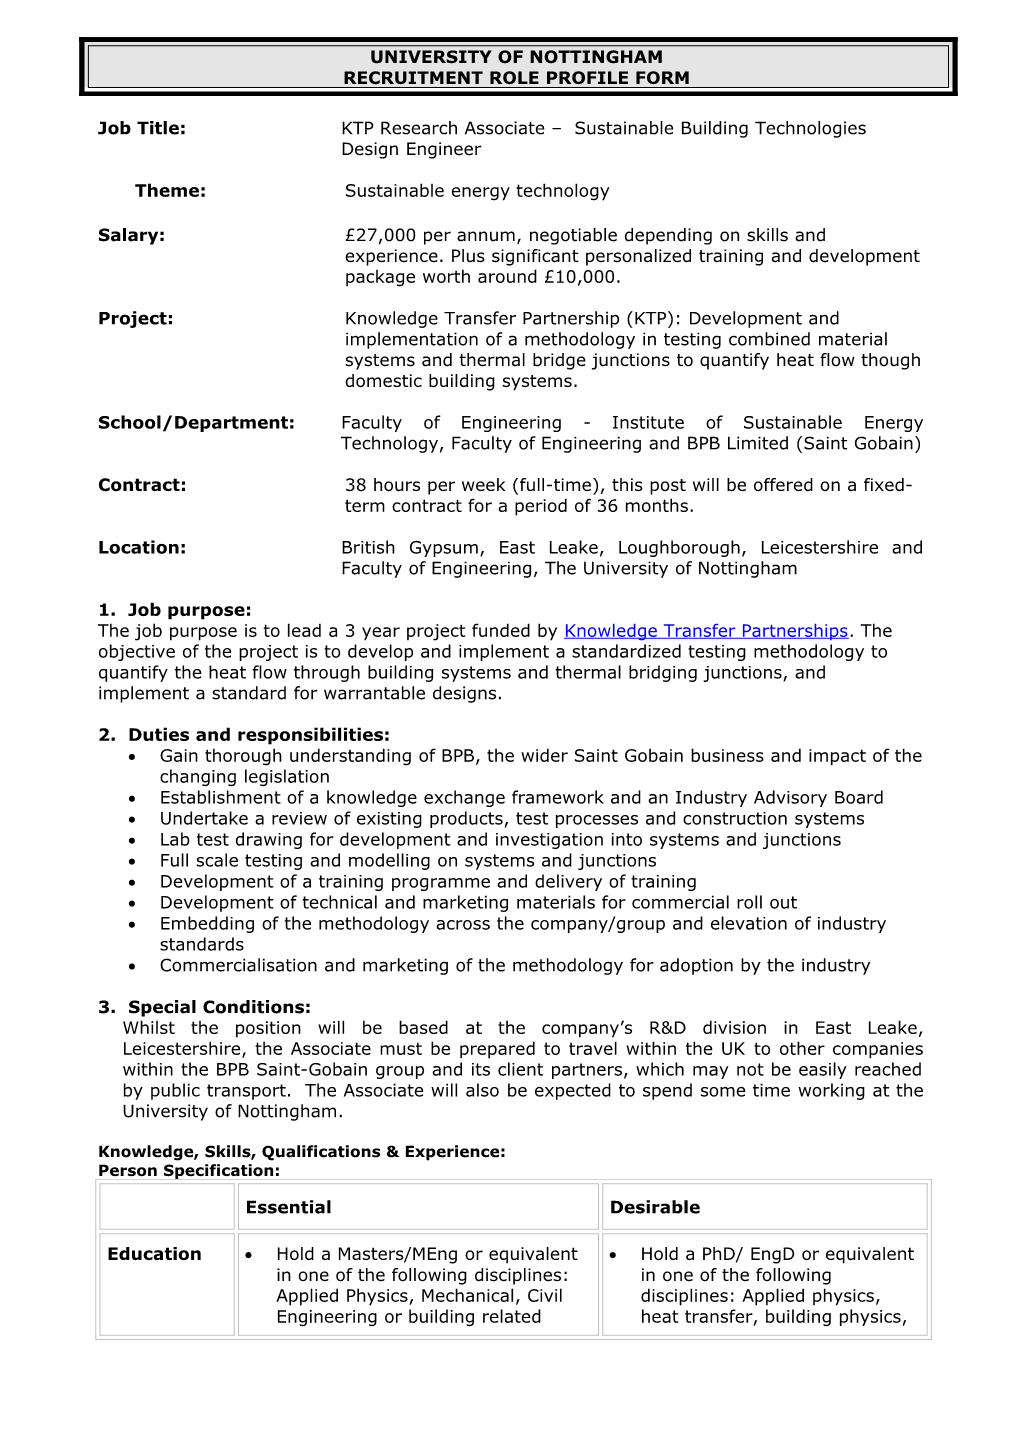 Job Title: KTP Research Associate Sustainable Building Technologies Design Engineer